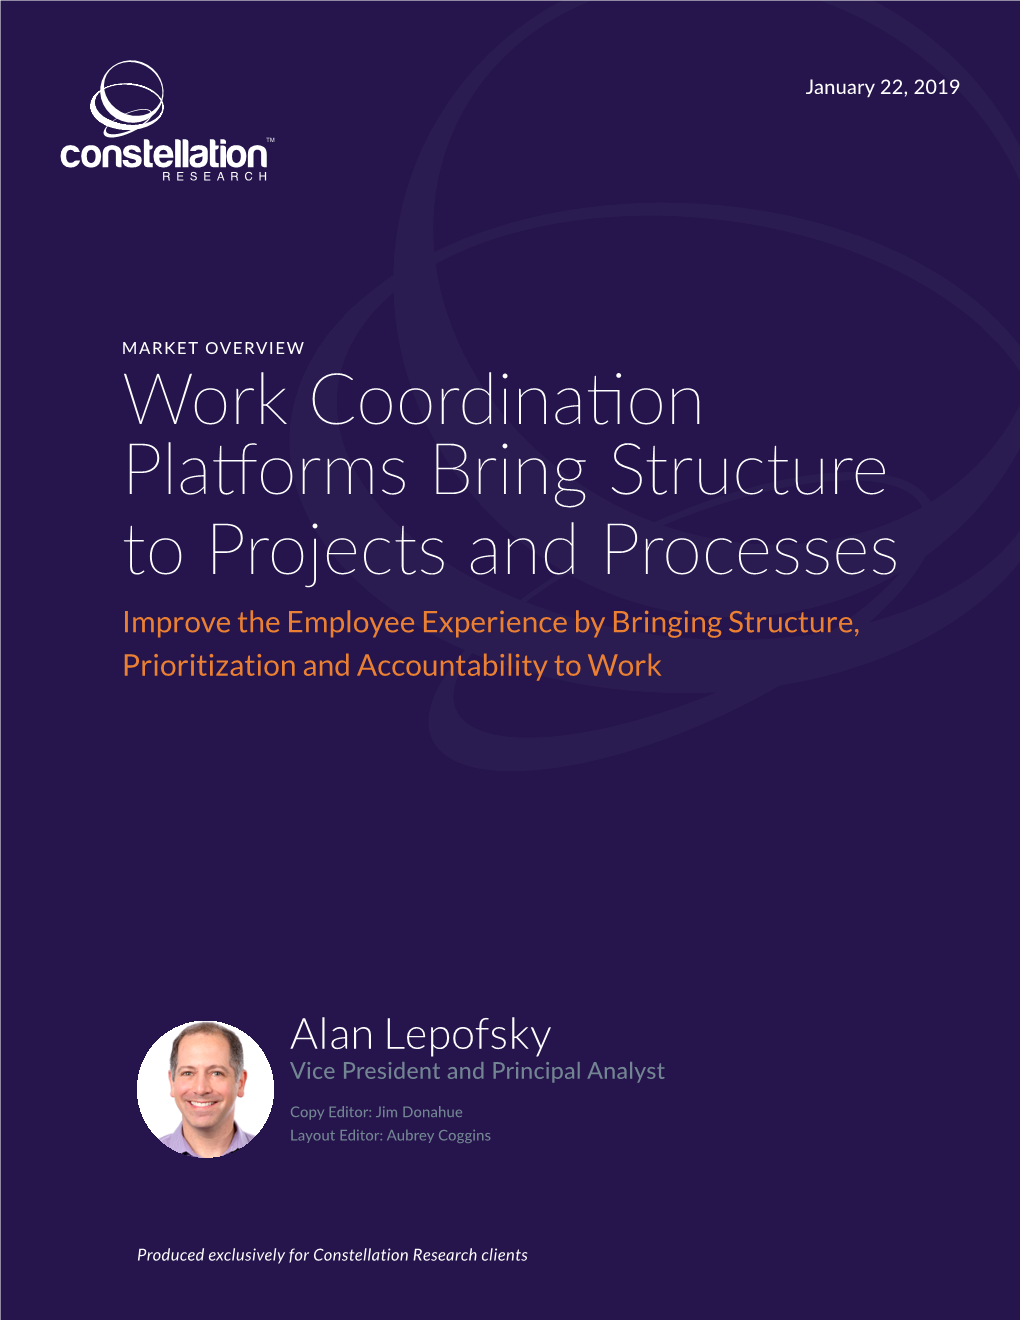 Work Coordination Platforms Bring Structure to Projects and Processes Improve the Employee Experience by Bringing Structure, Prioritization and Accountability to Work